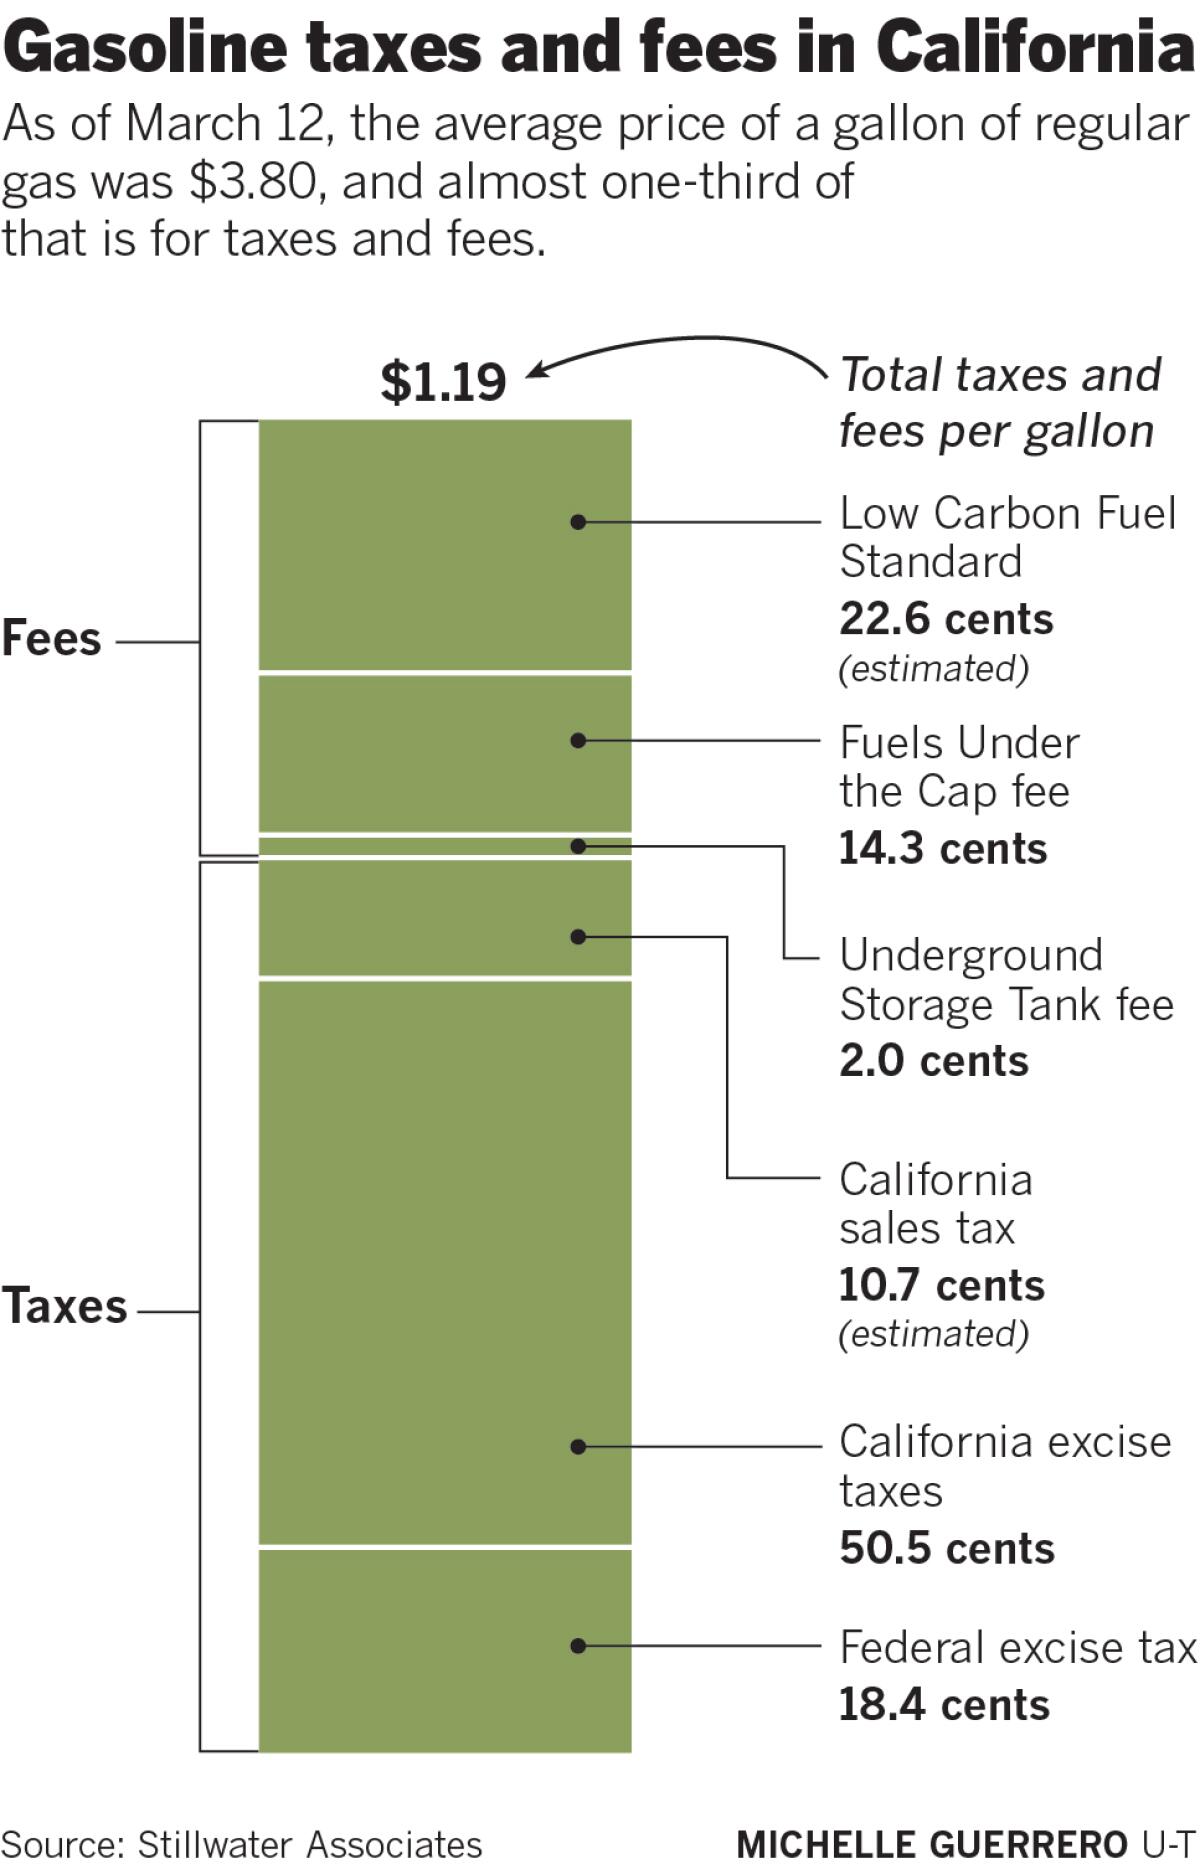 Gasoline taxes and fees in California